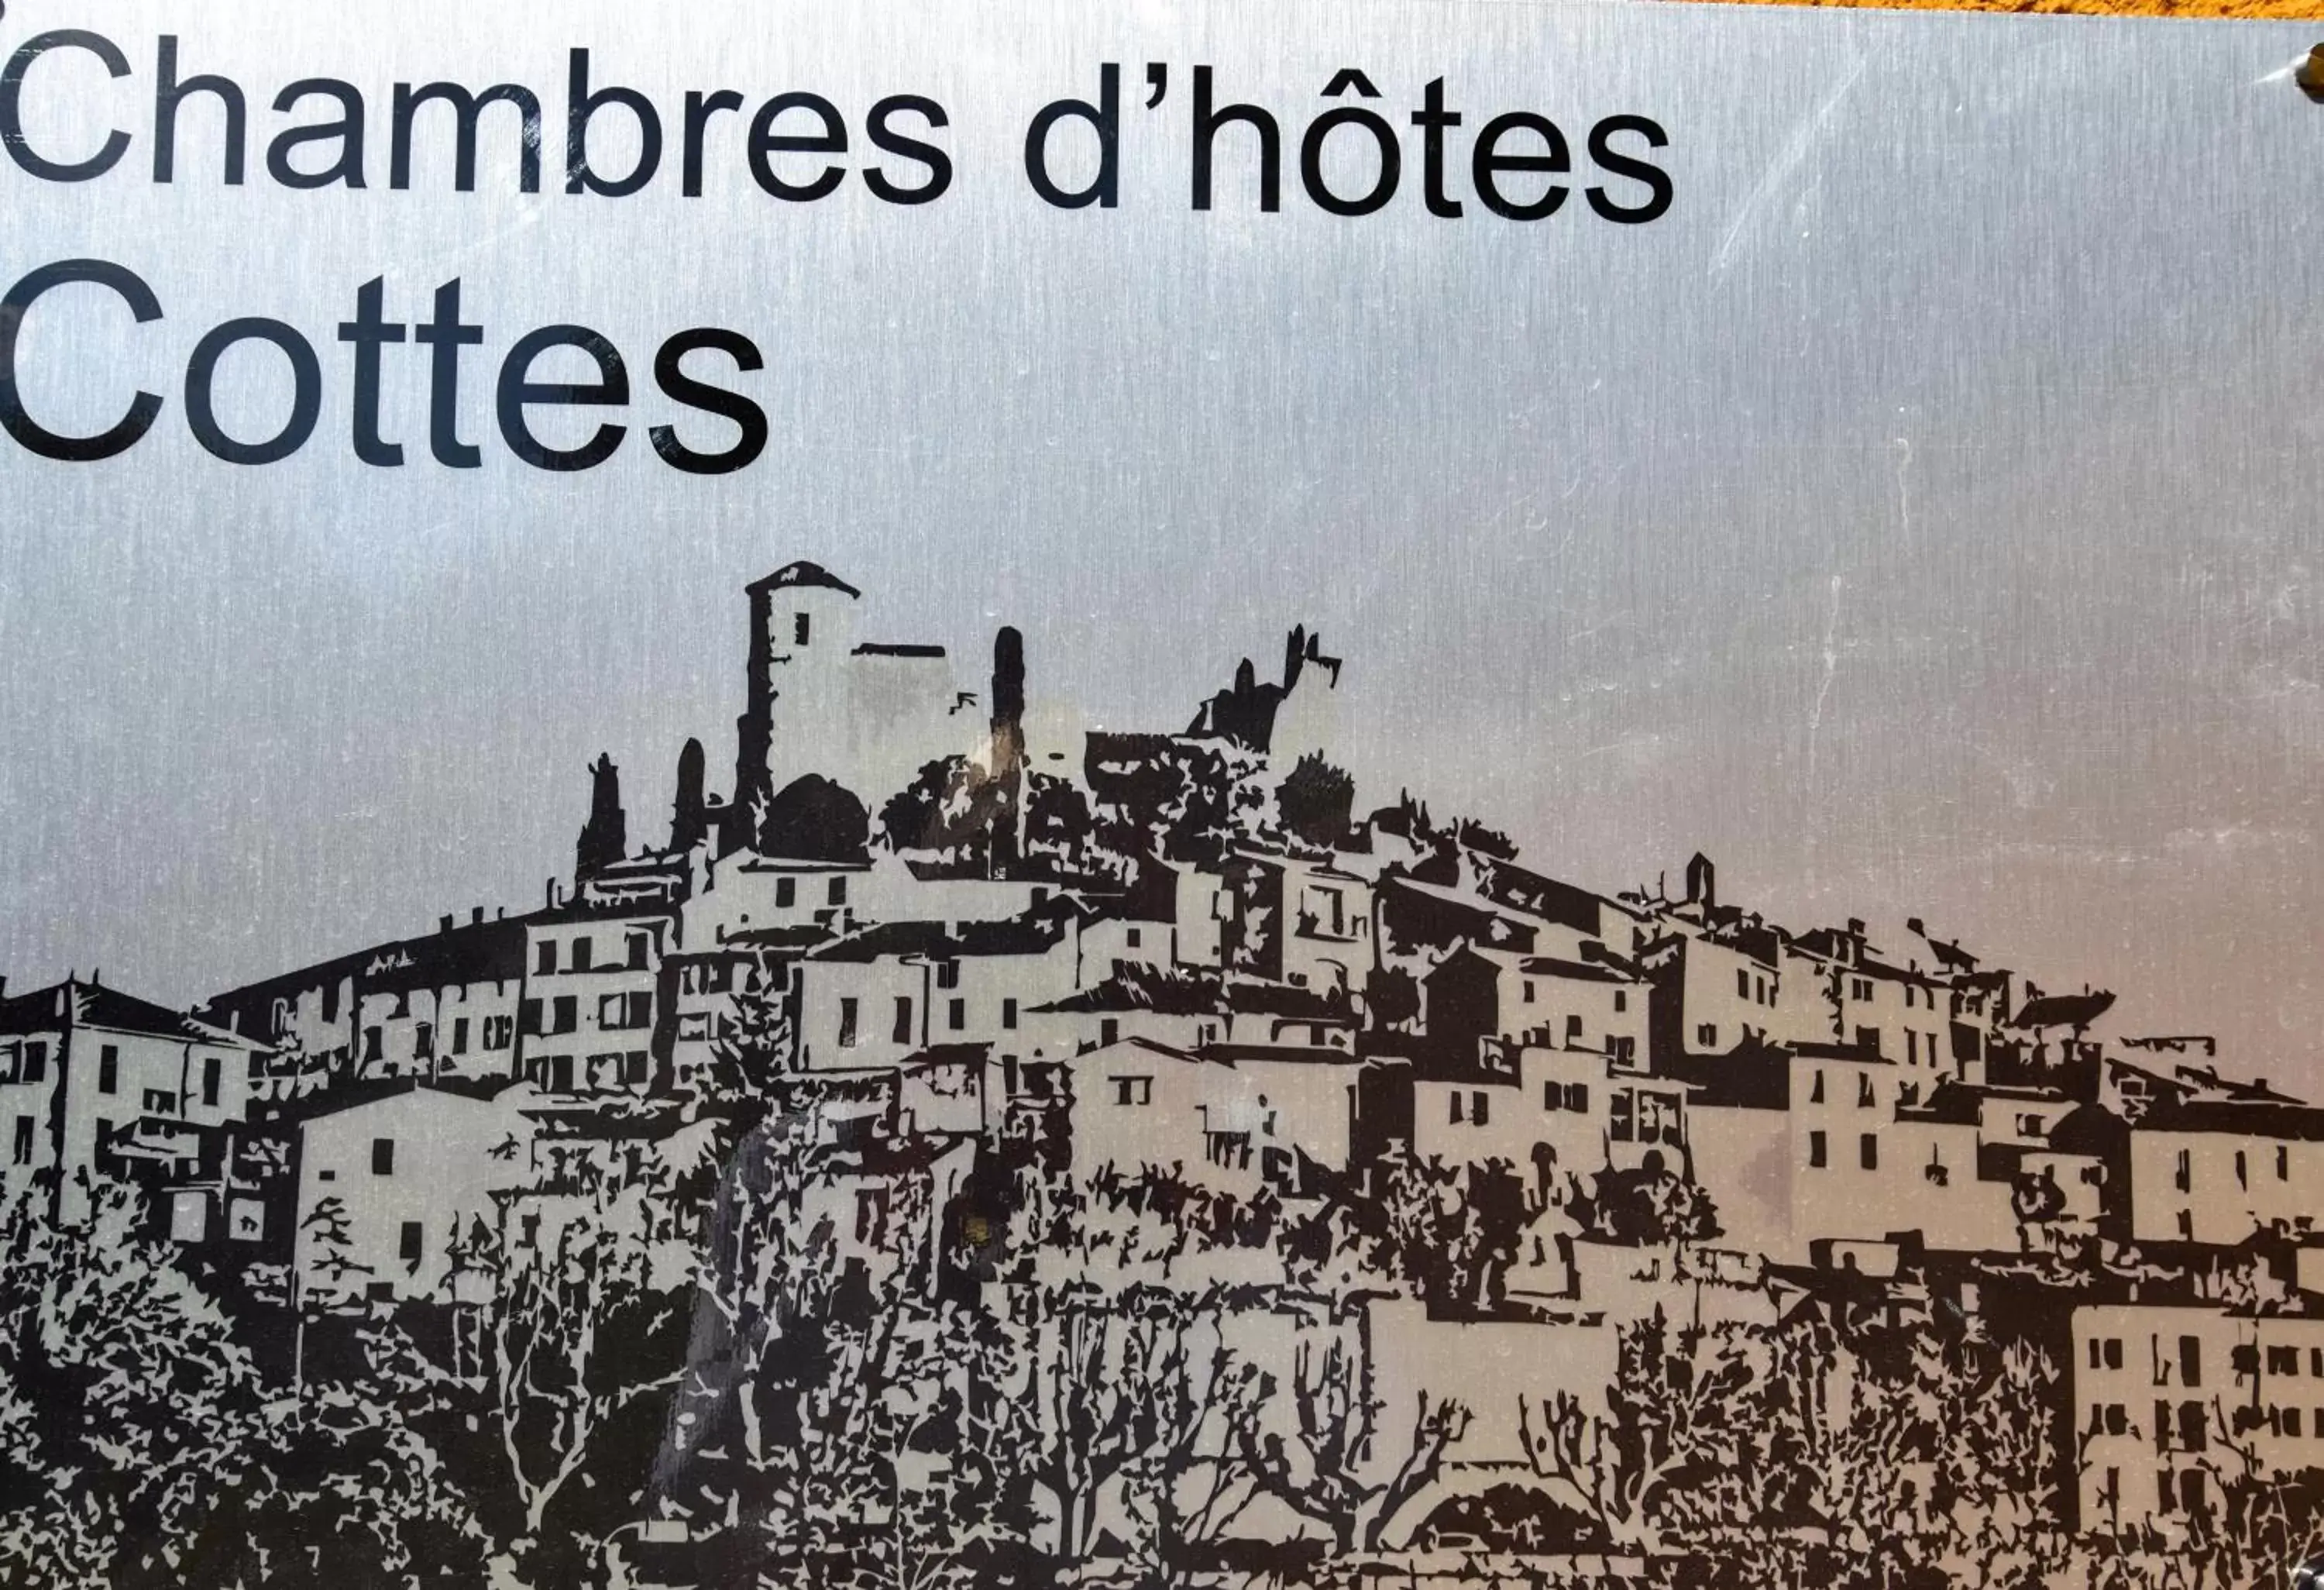 Property logo or sign in Chambre d'hôtes Cottes